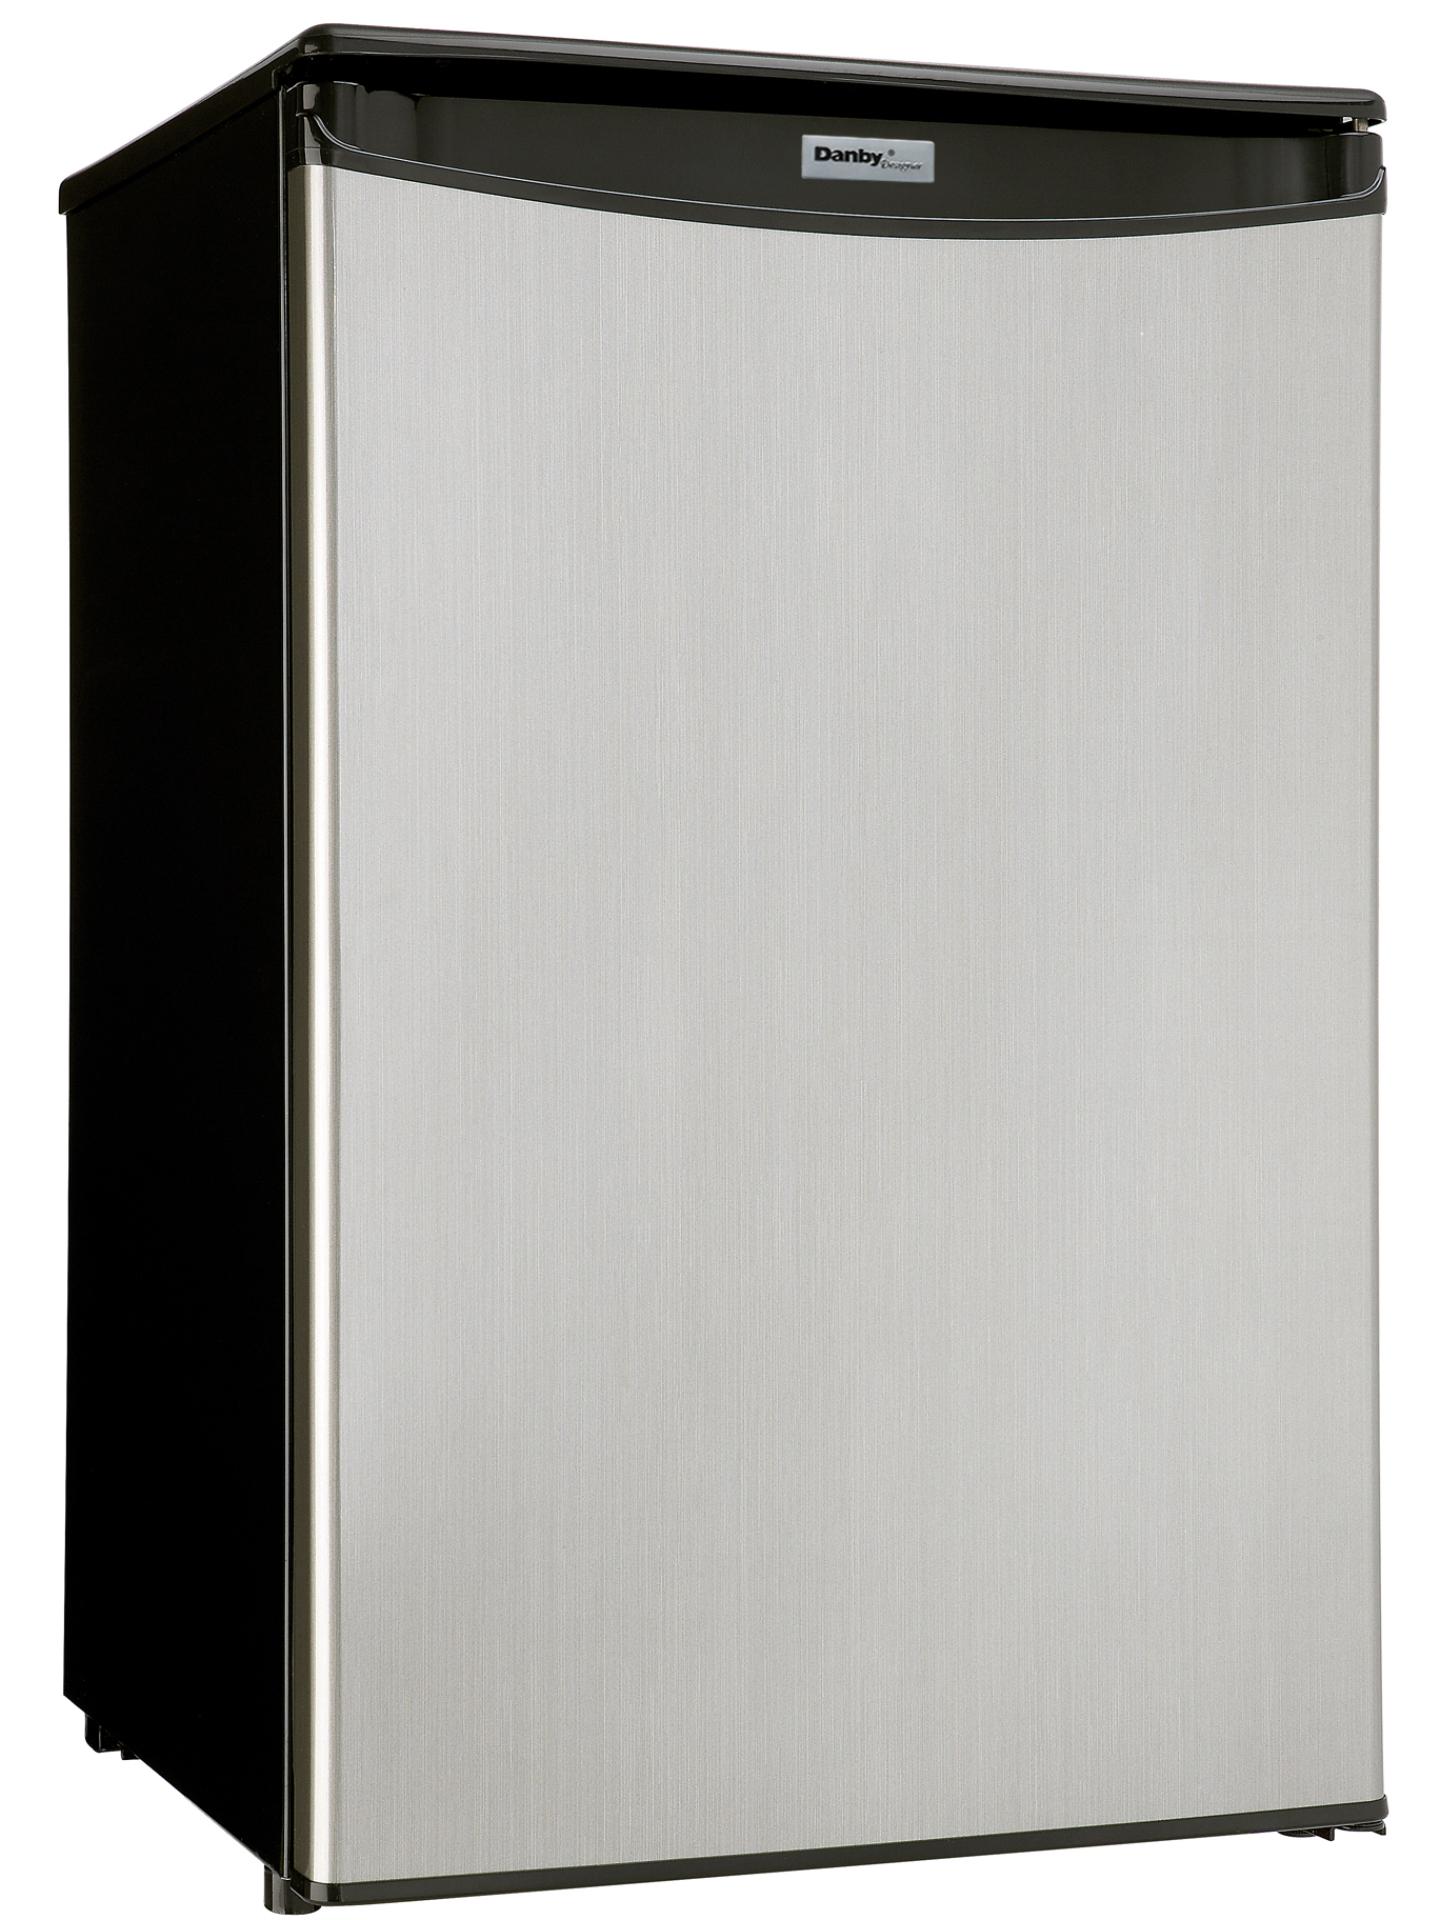 Danby 4.4 cu. ft. Compact Fridge in Stainless Steel